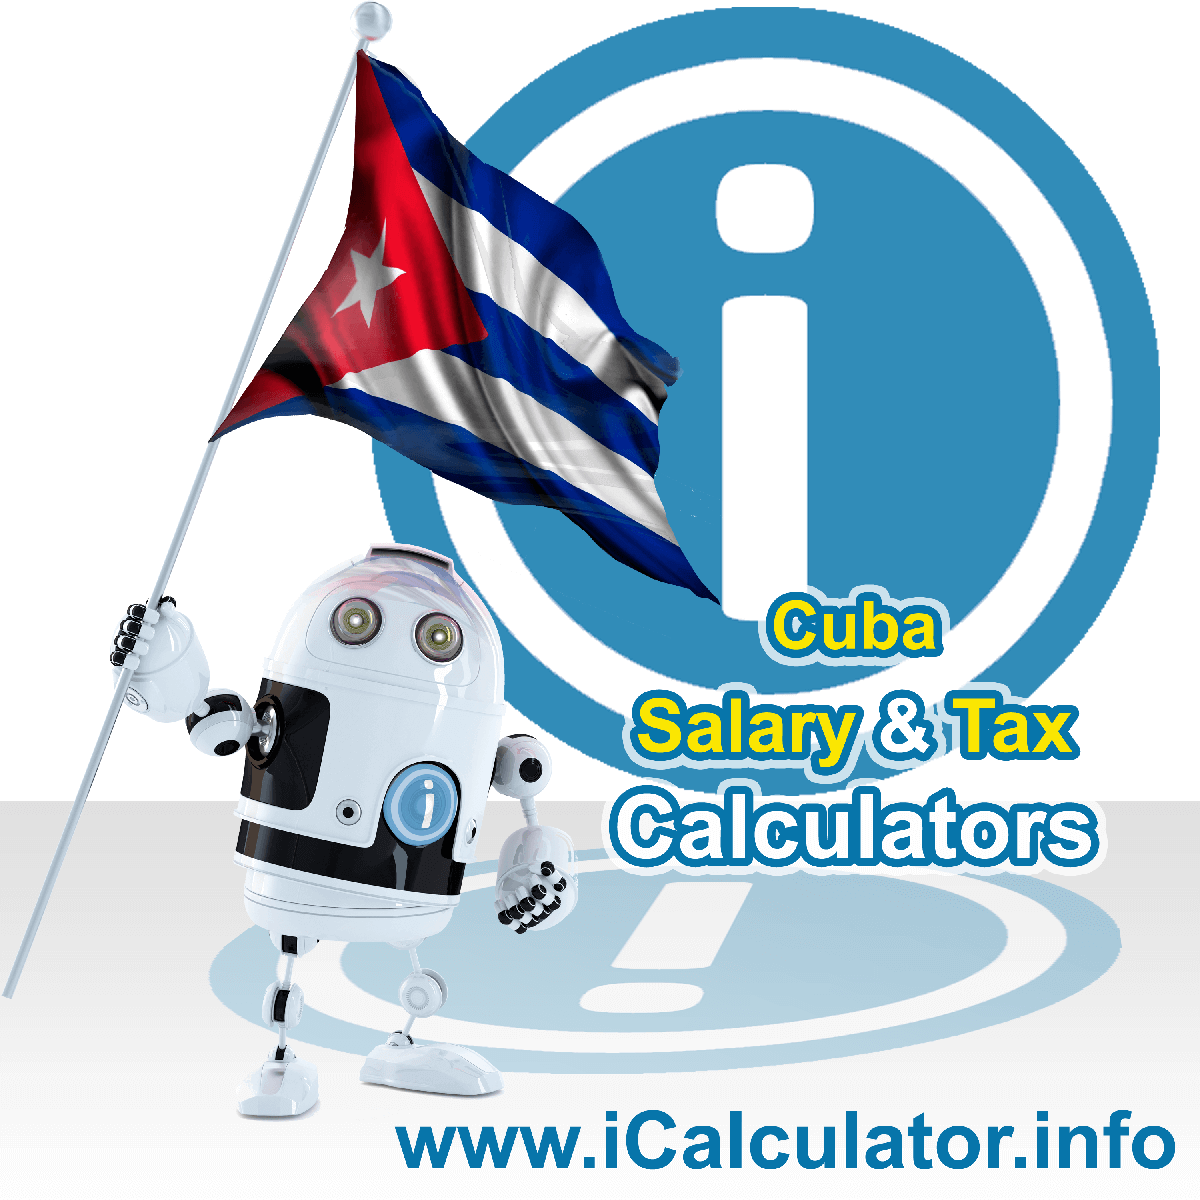 Cuba Salary Calculator. This image shows the Cubaese flag and information relating to the tax formula for the Cuba Tax Calculator